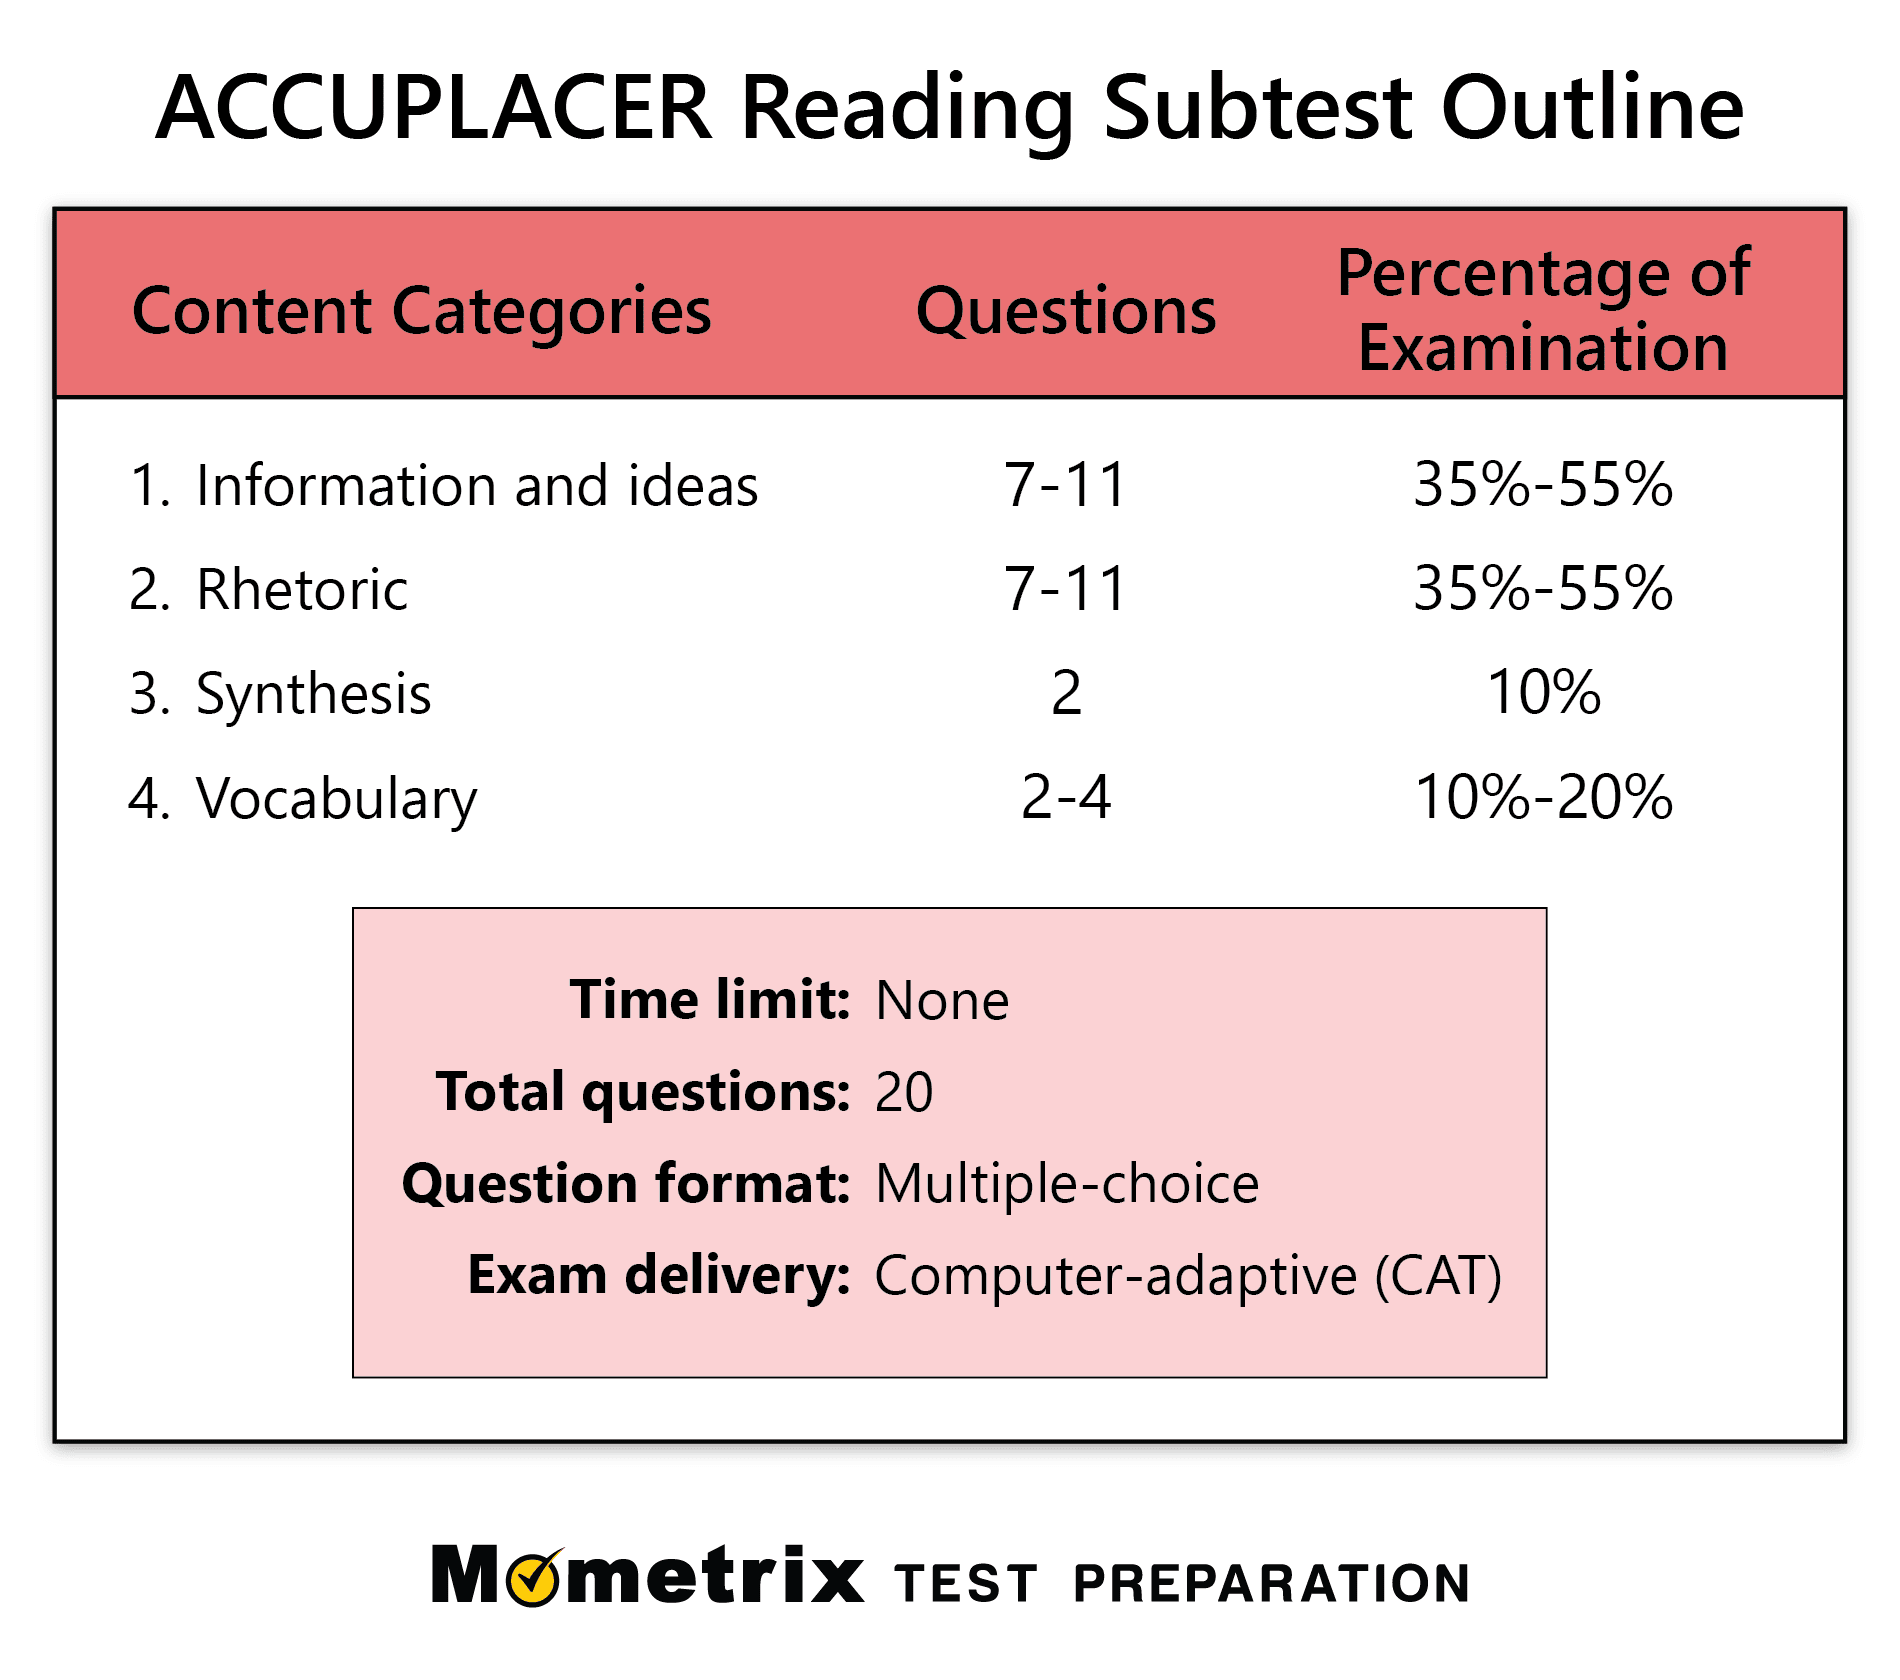 Accuplacer Practice Test Questions